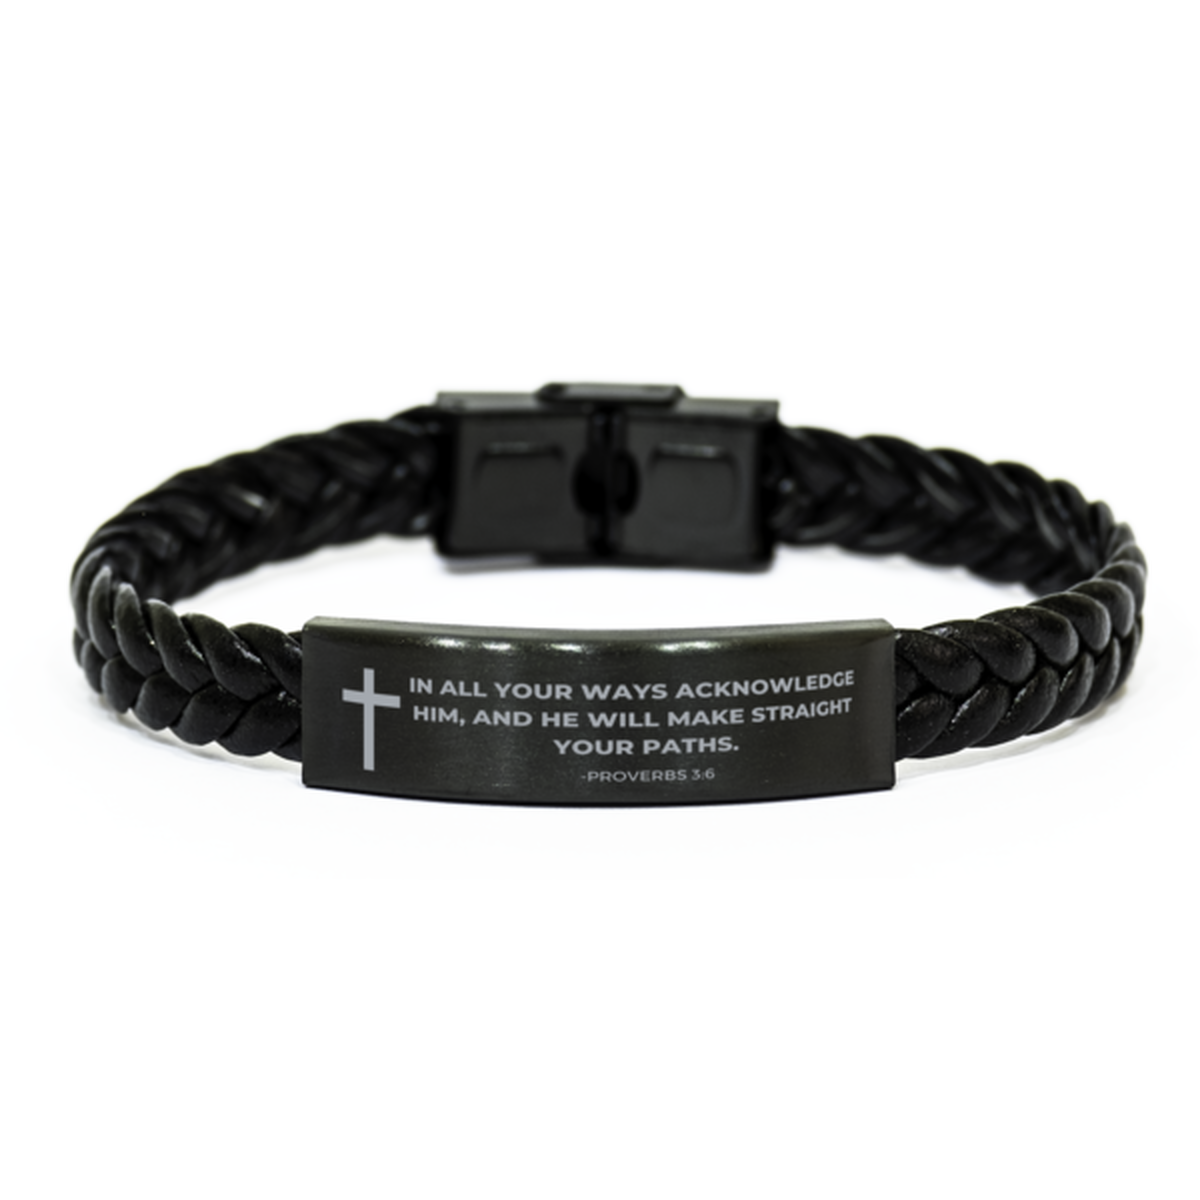 Baptism Gifts For Teenage Boys Girls, Christian Bible Verse Braided Leather Bracelet, In all your ways acknowledge Him, Catholic Confirmation Gifts for Son, Godson, Grandson, Nephew